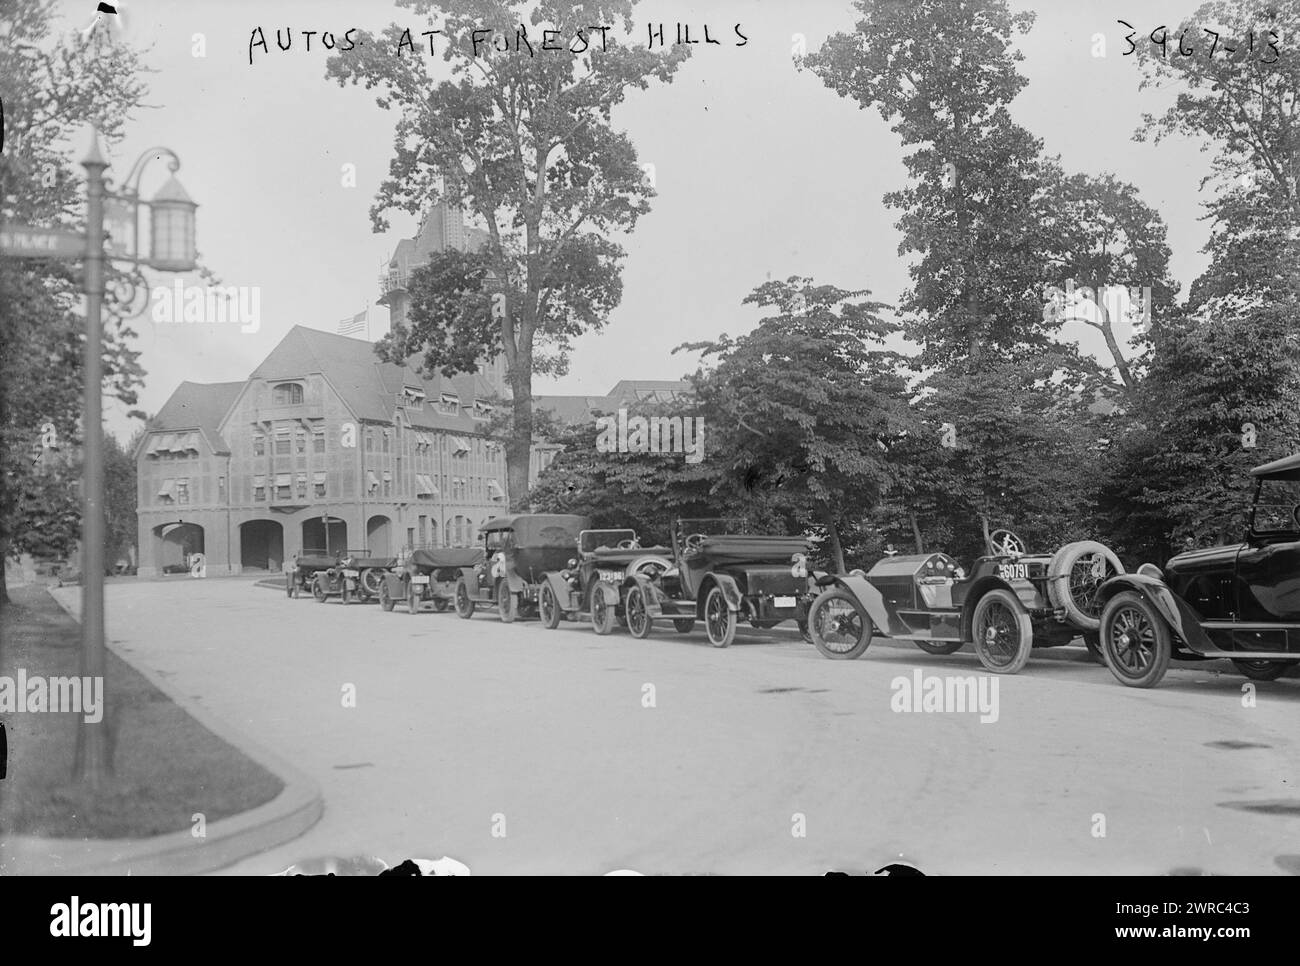 Autos at Forest Hills, between ca. 1915 and ca. 1920, Glass negatives, 1 negative: glass Stock Photo